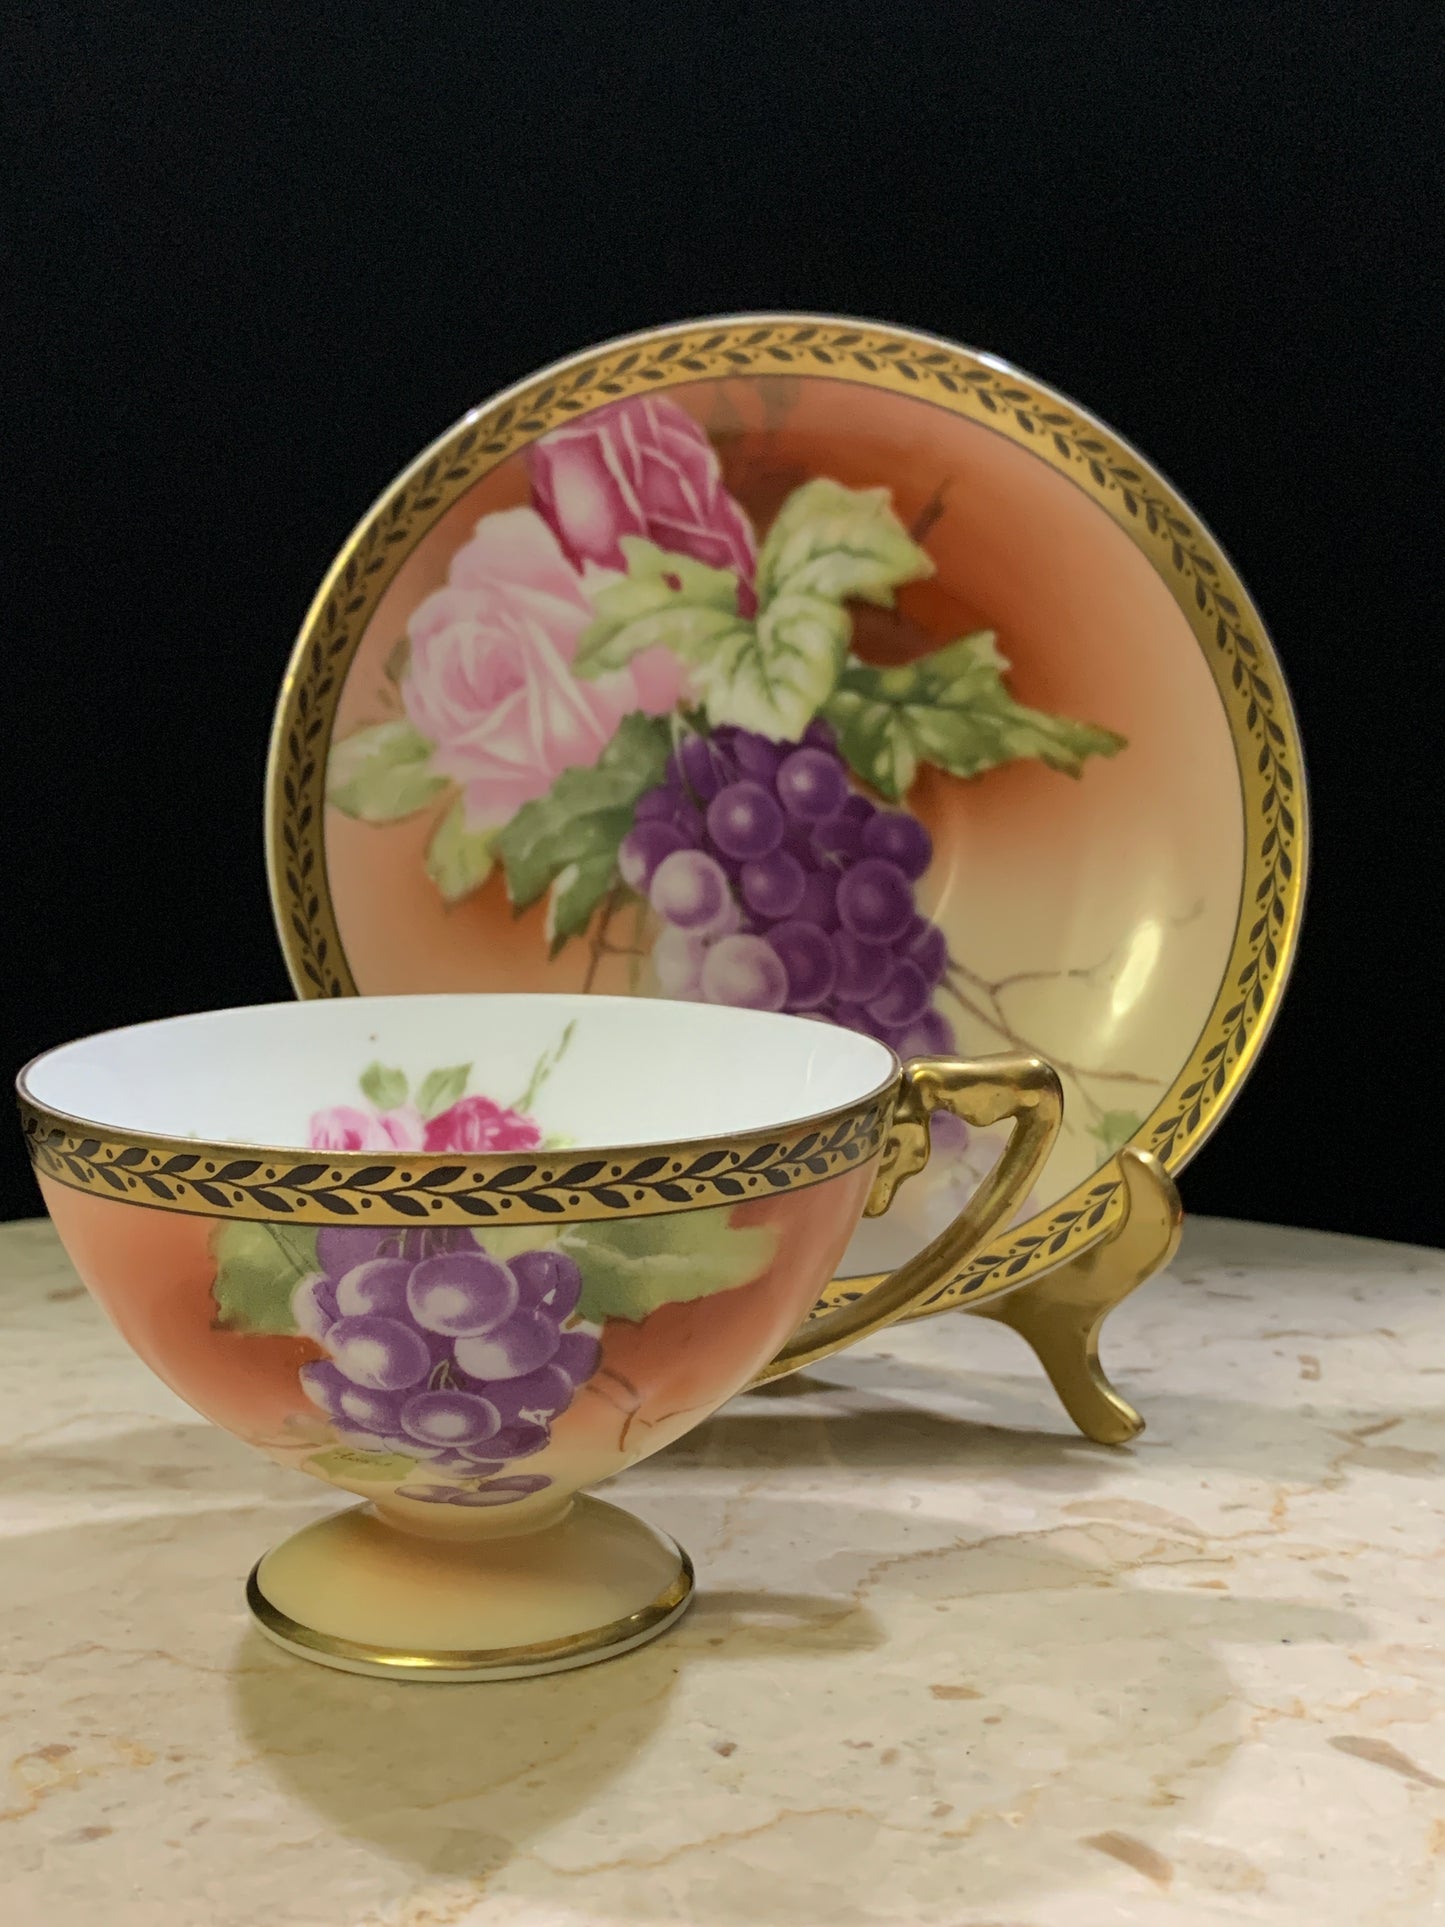 Rosenthal Hand Painted Tea Cup and Saucer with Grape Pattern Bavaria China Teacup